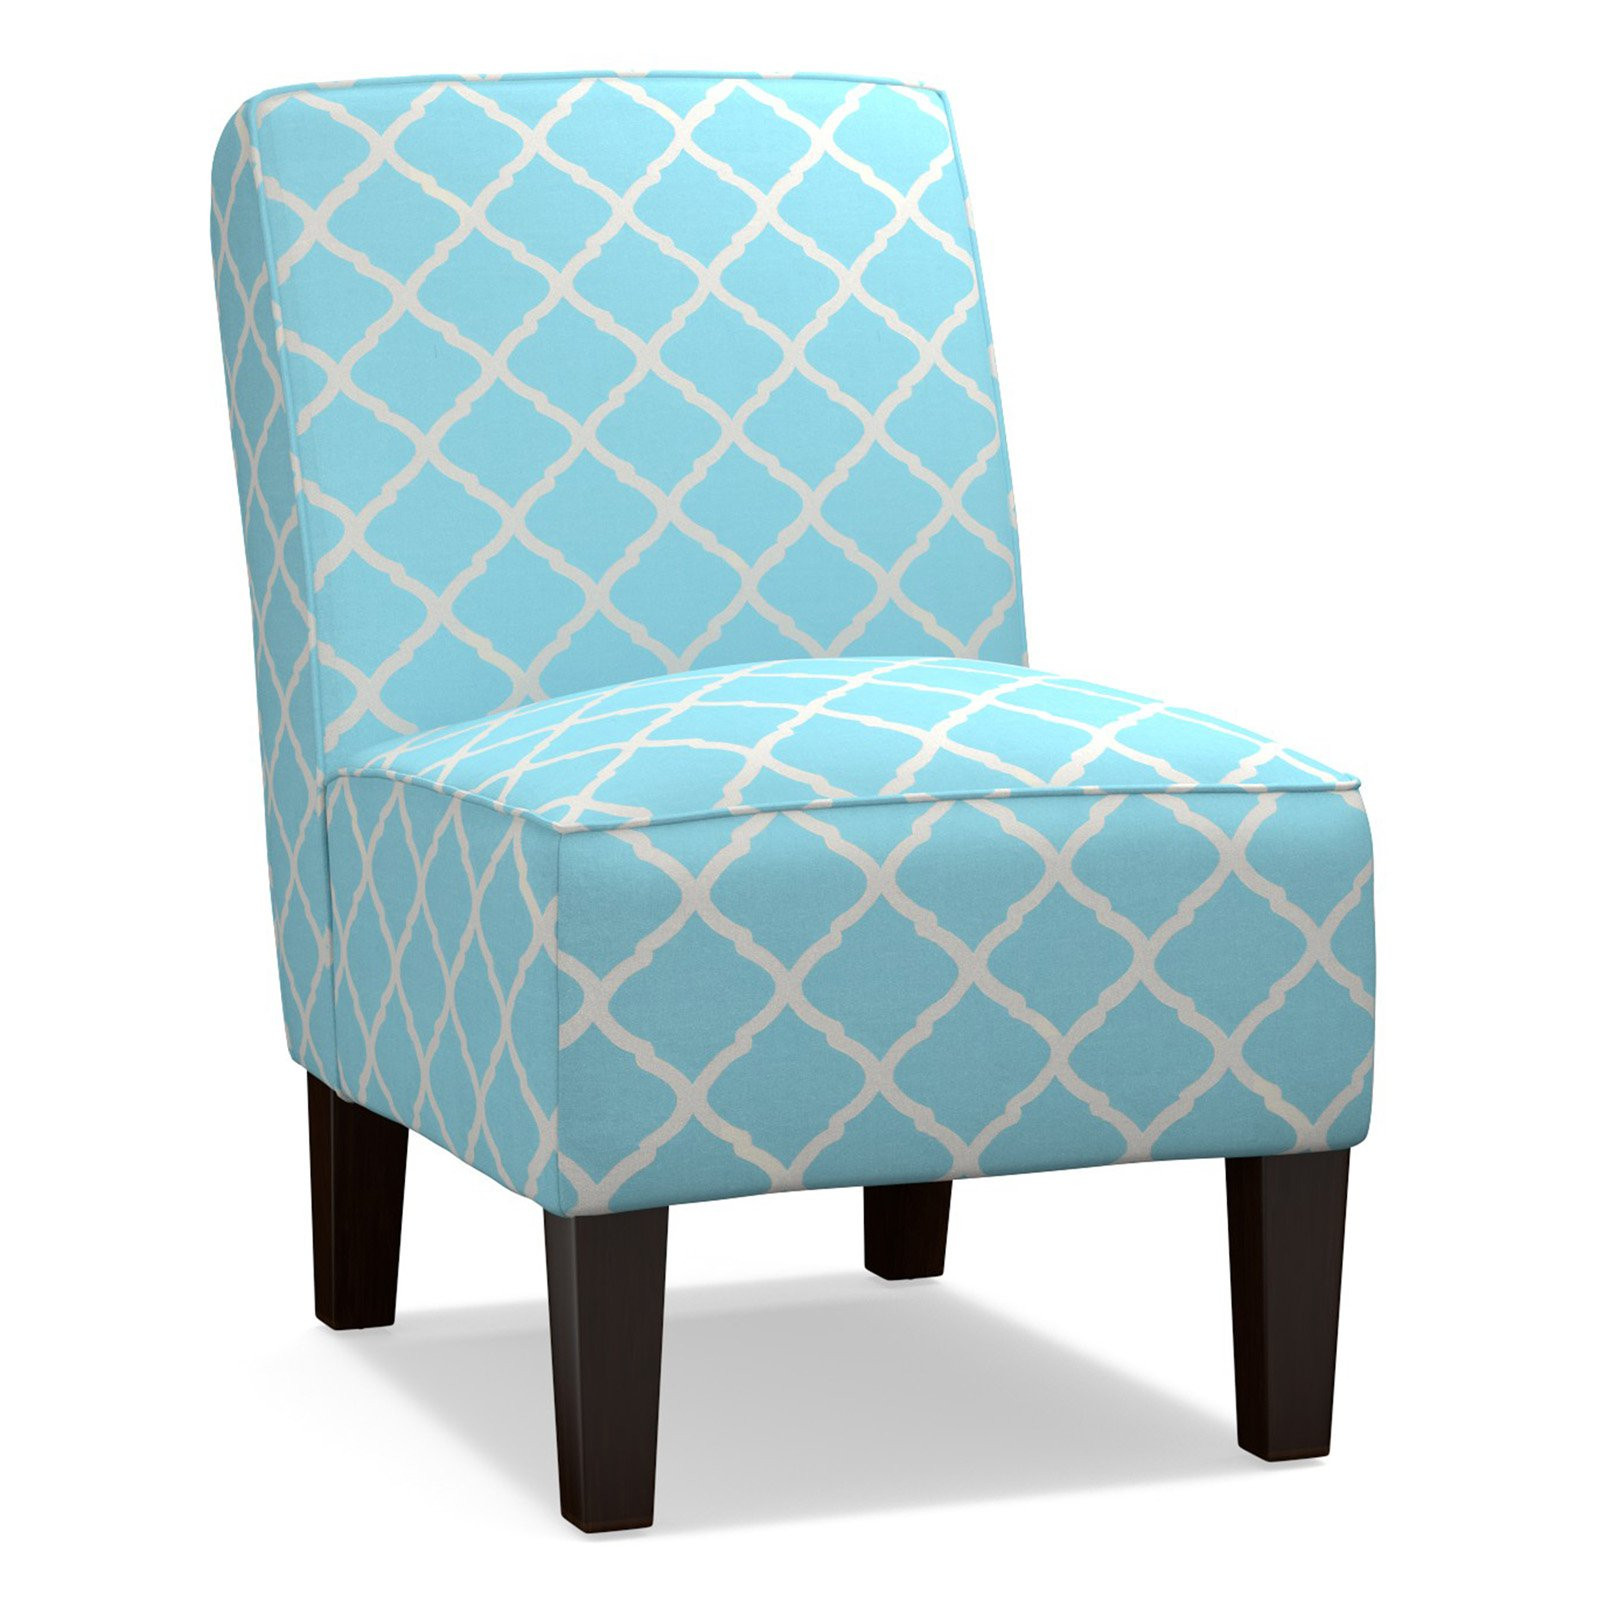 Living Room Chairs Under 100
 Accent Chairs For Living Room Under $100 – Modern House